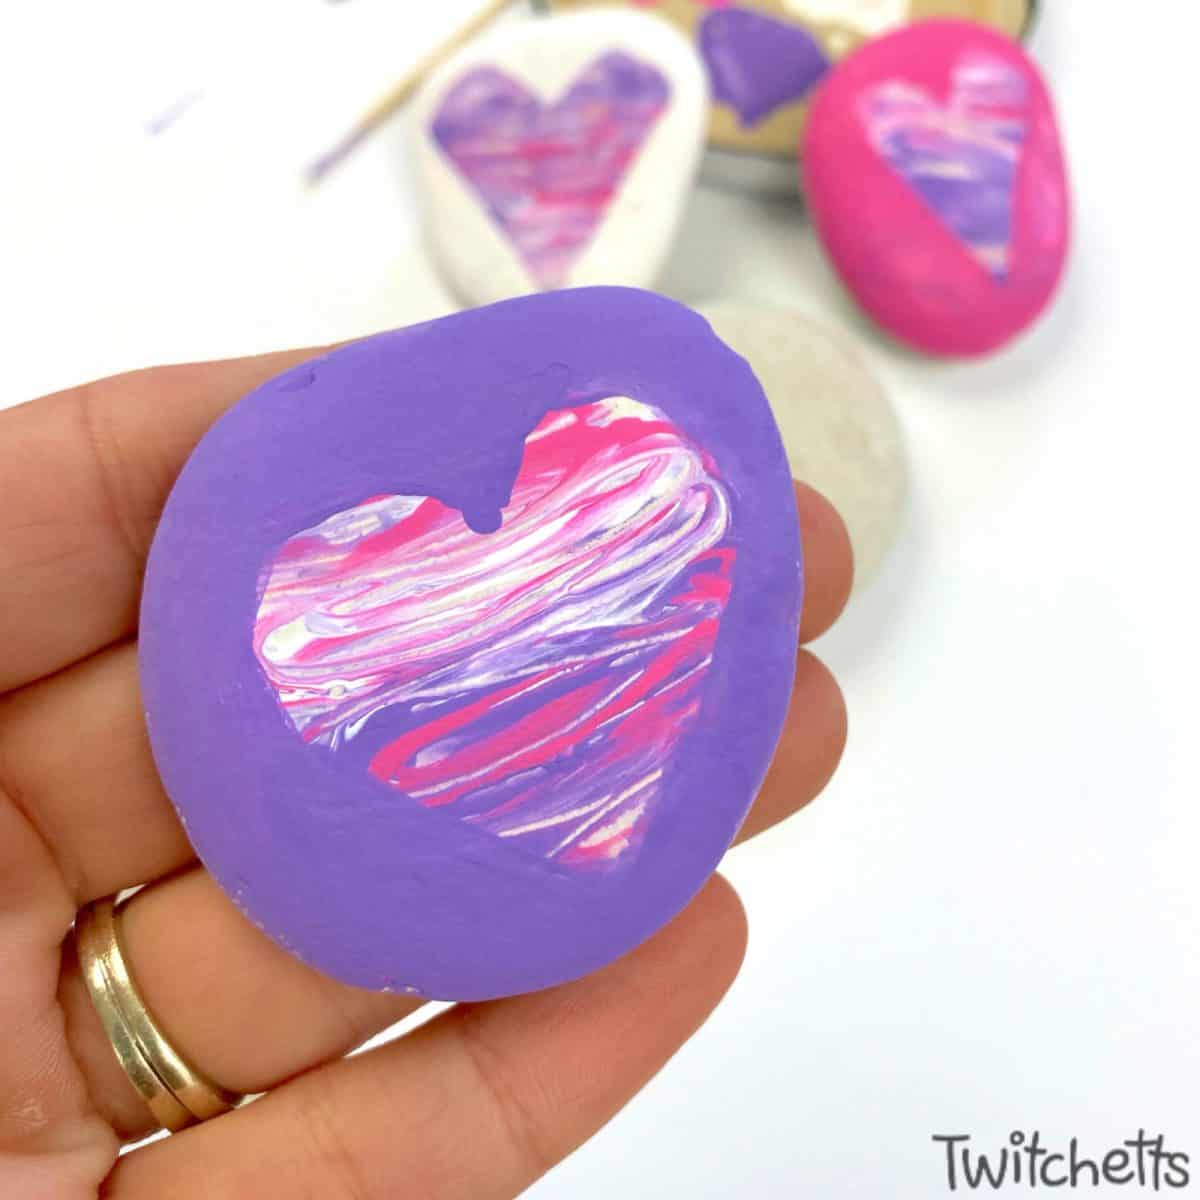 Valentine S Day Rock Painting Idea For Kids Twitchetts Free acrylic painting lessons on youtube: day rock painting idea for kids